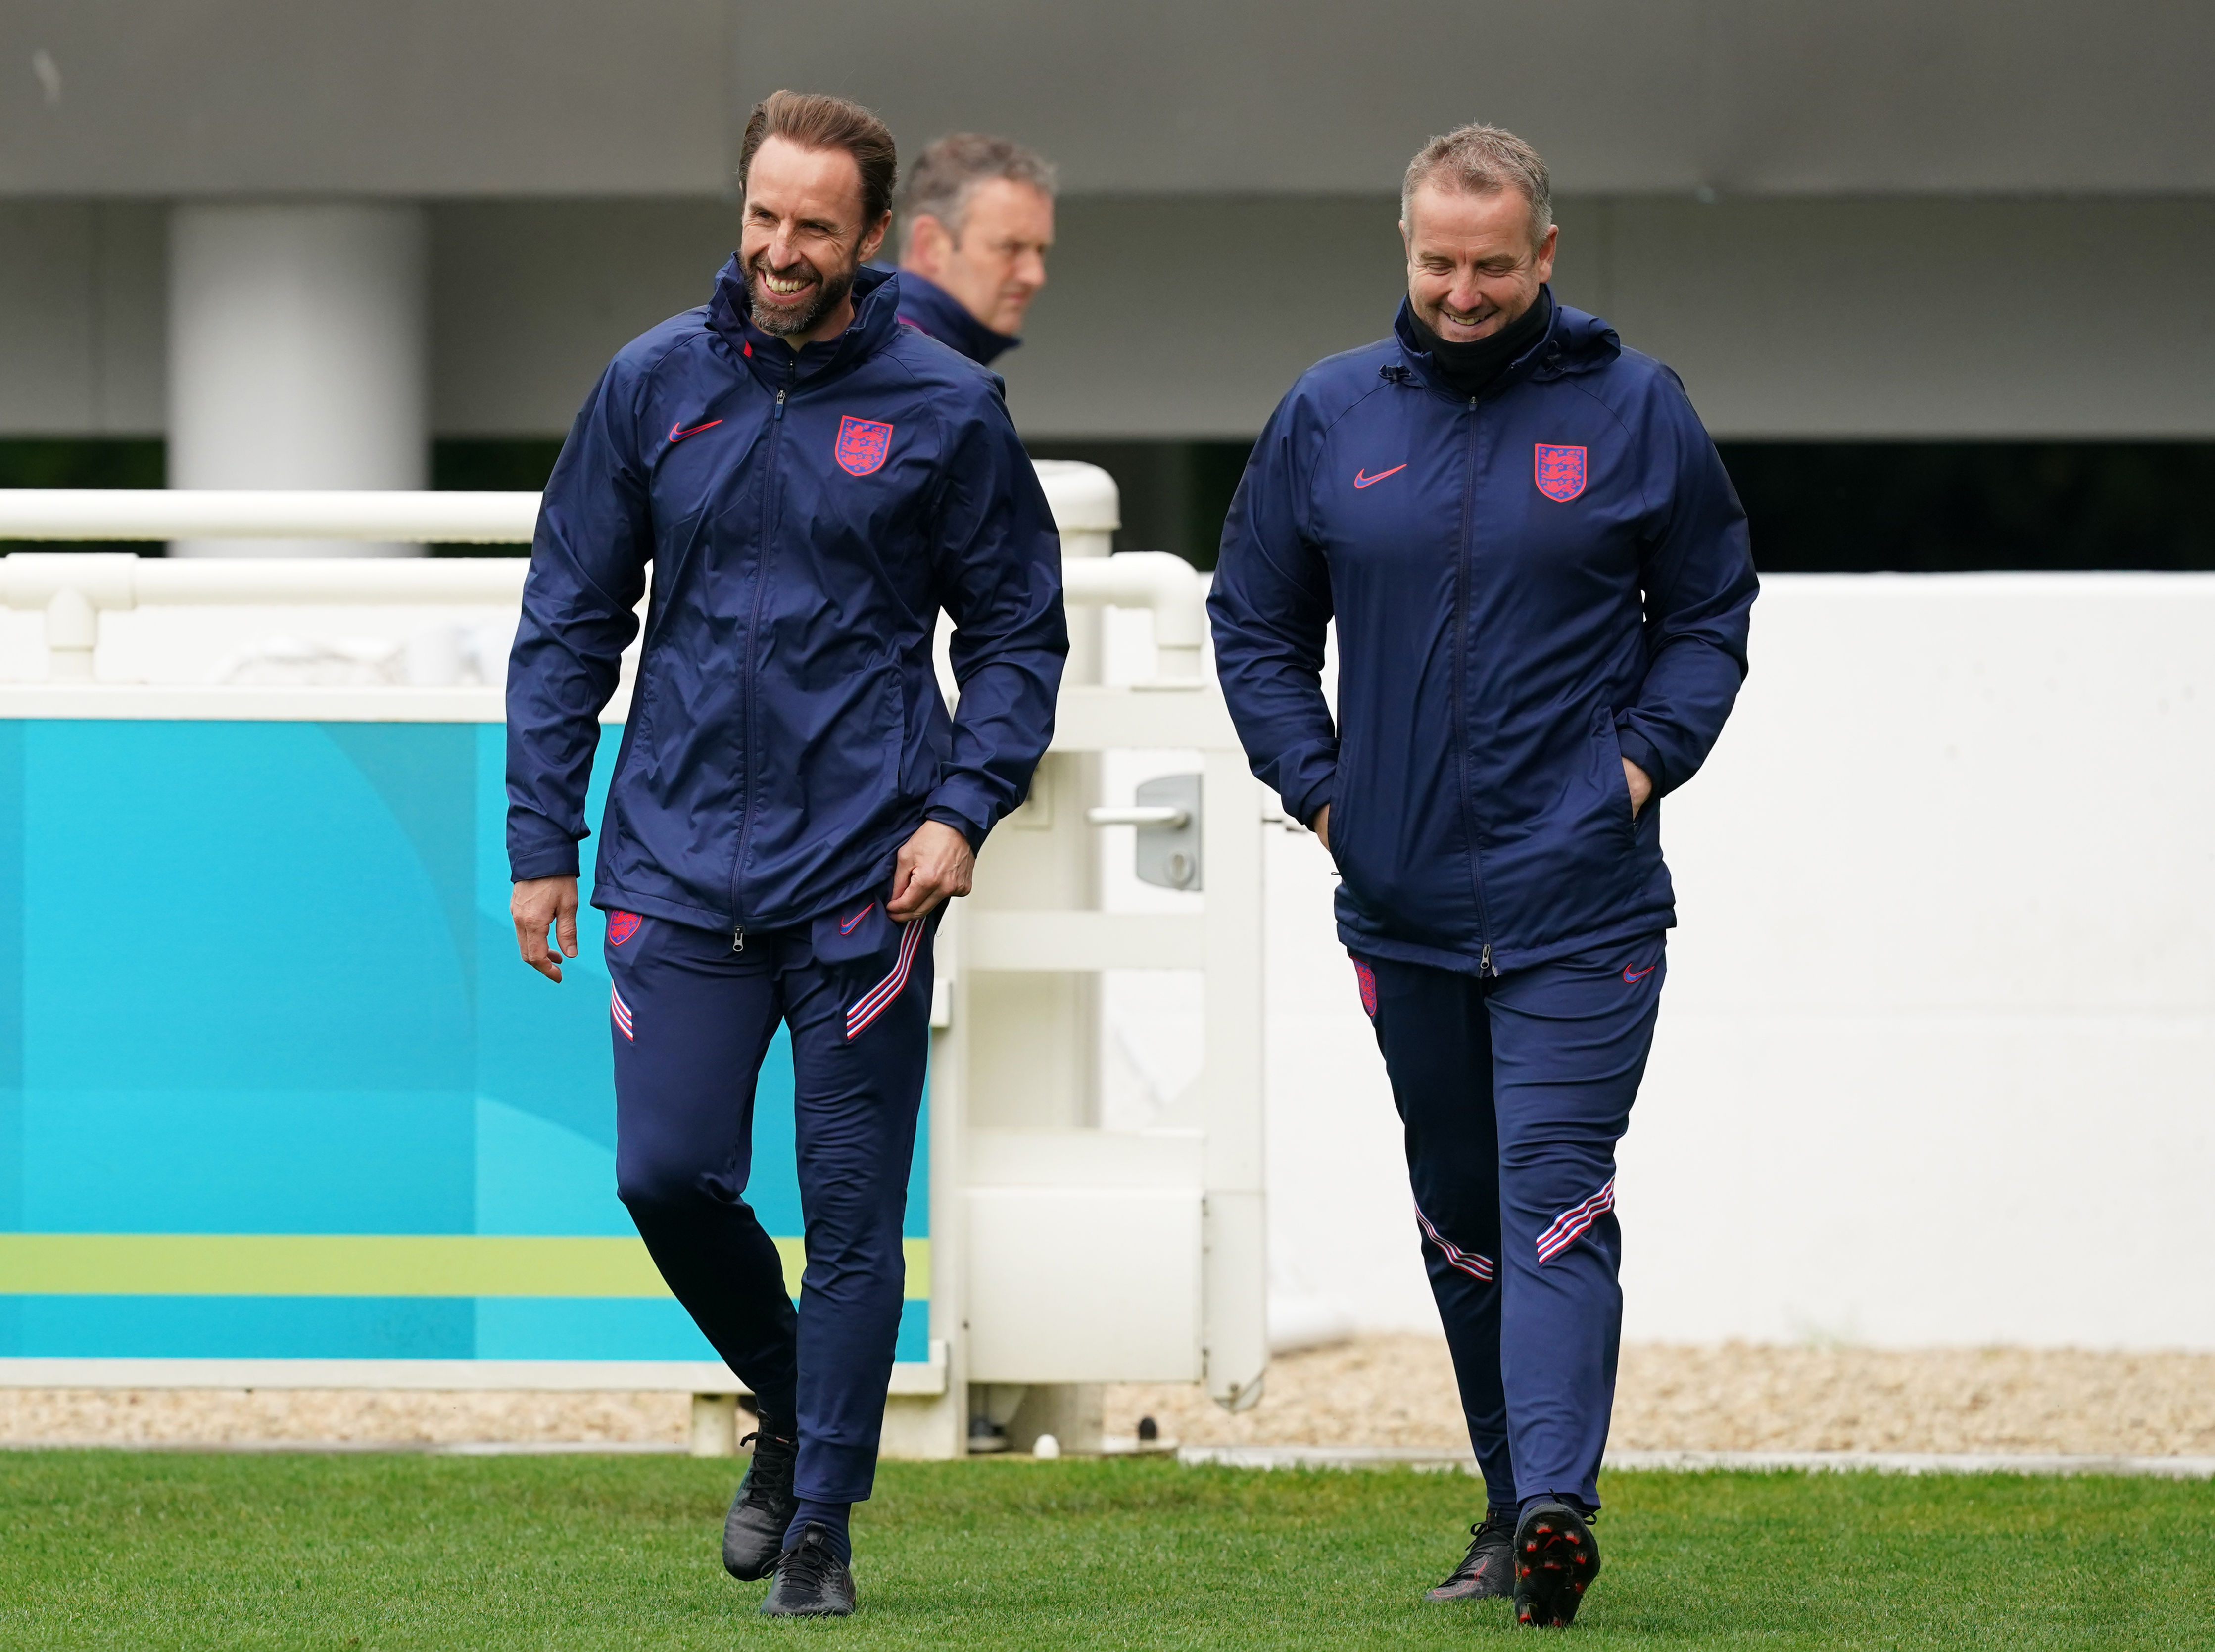 England manager Gareth Southgate and goalkeeping coach Martyn Margetson are preparing for the Euros